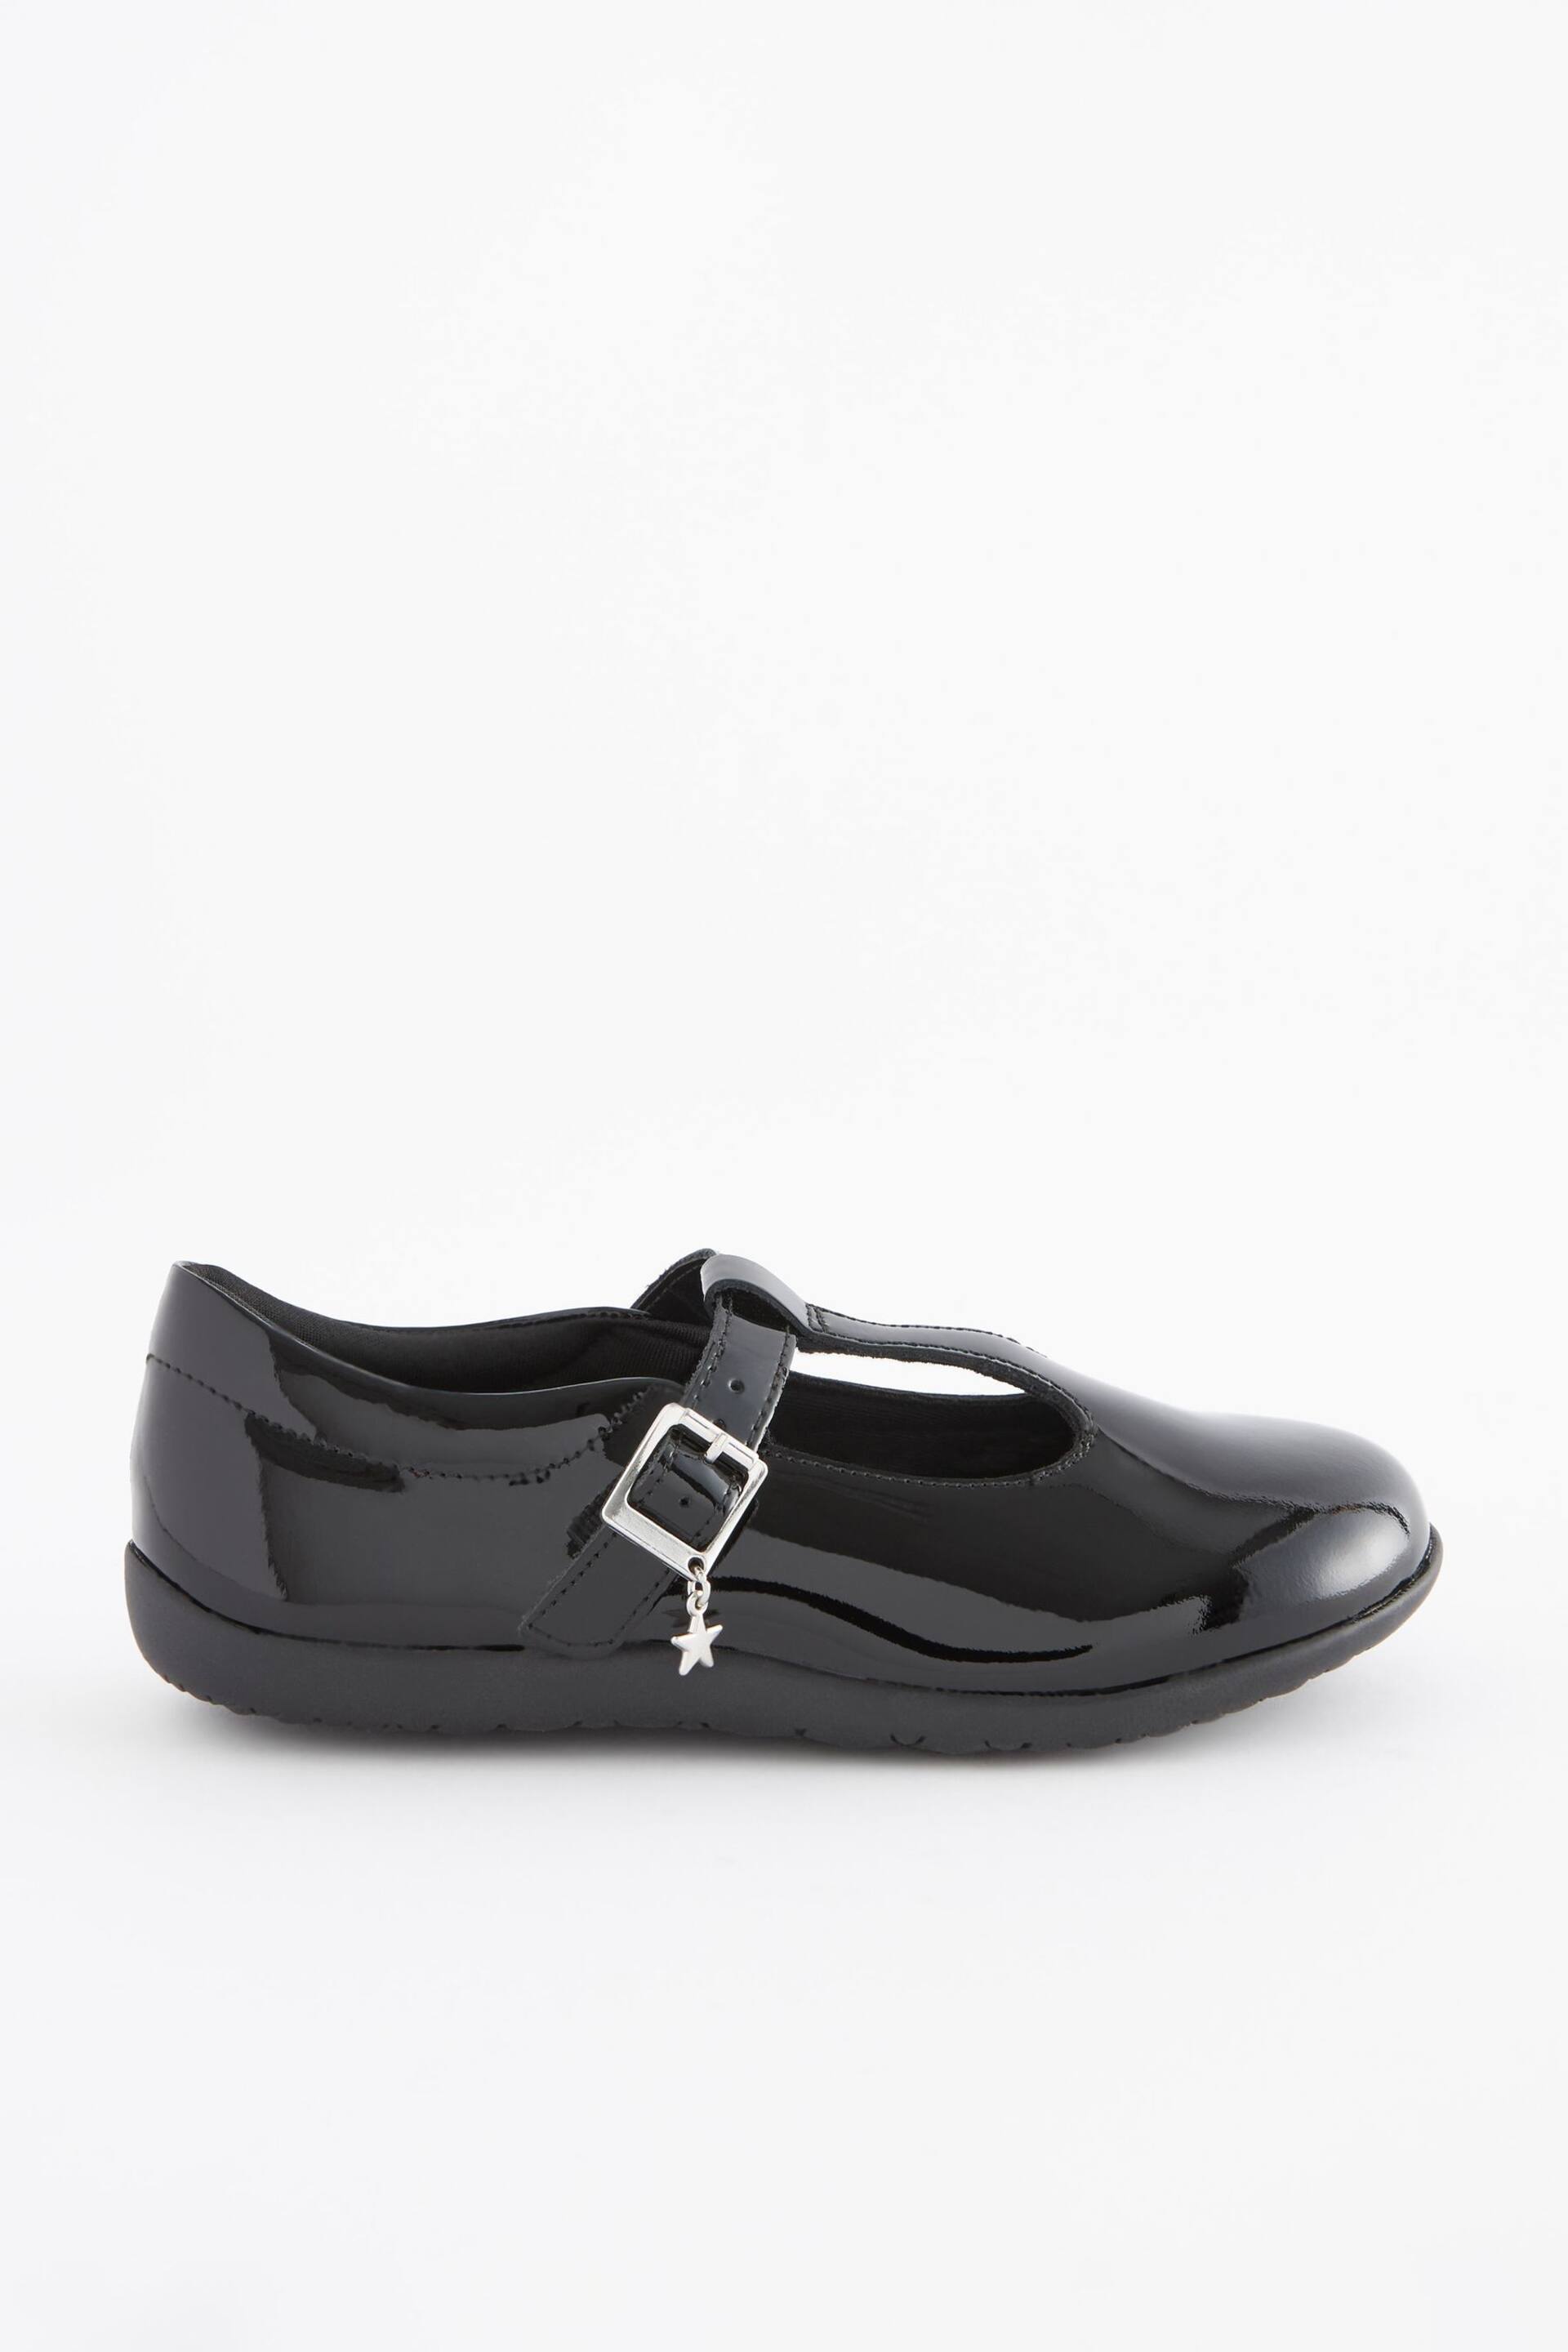 Black Patent School Leather T-Bar Shoes - Image 2 of 5